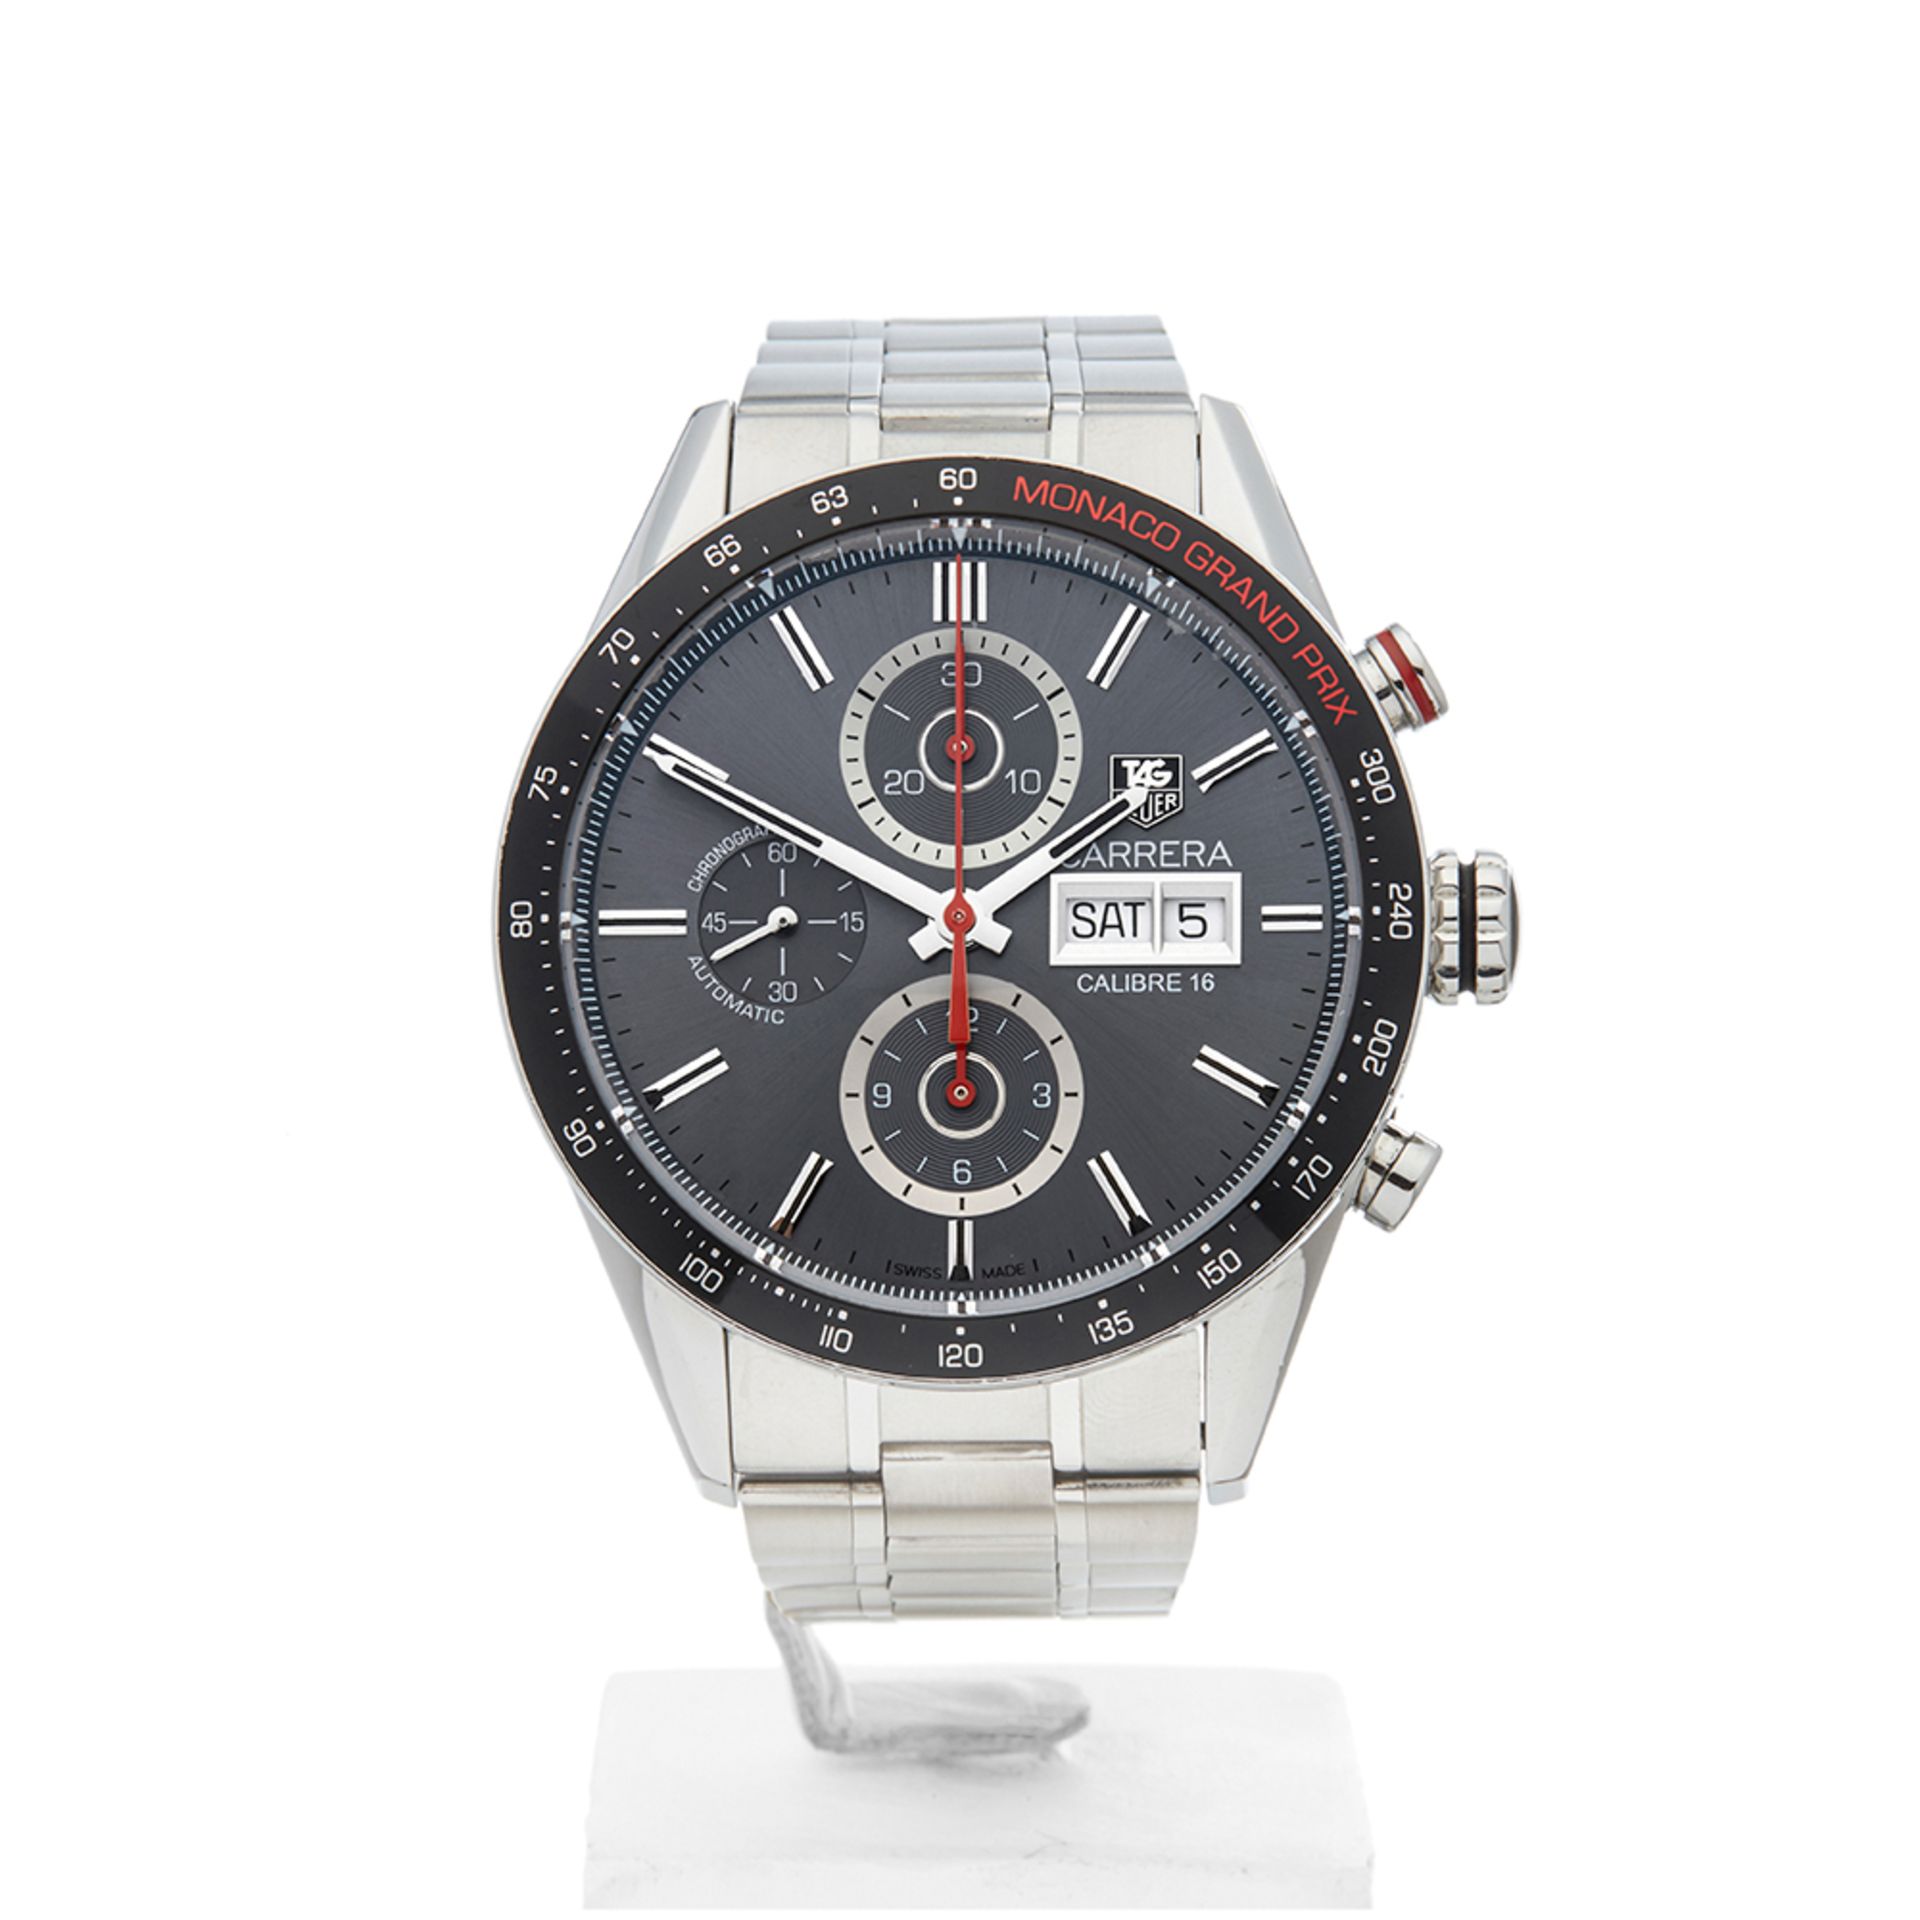 Tag Heuer Carrera Monaco GP Chronograph 43mm Stainless Steel - CV2A1M - Image 2 of 9